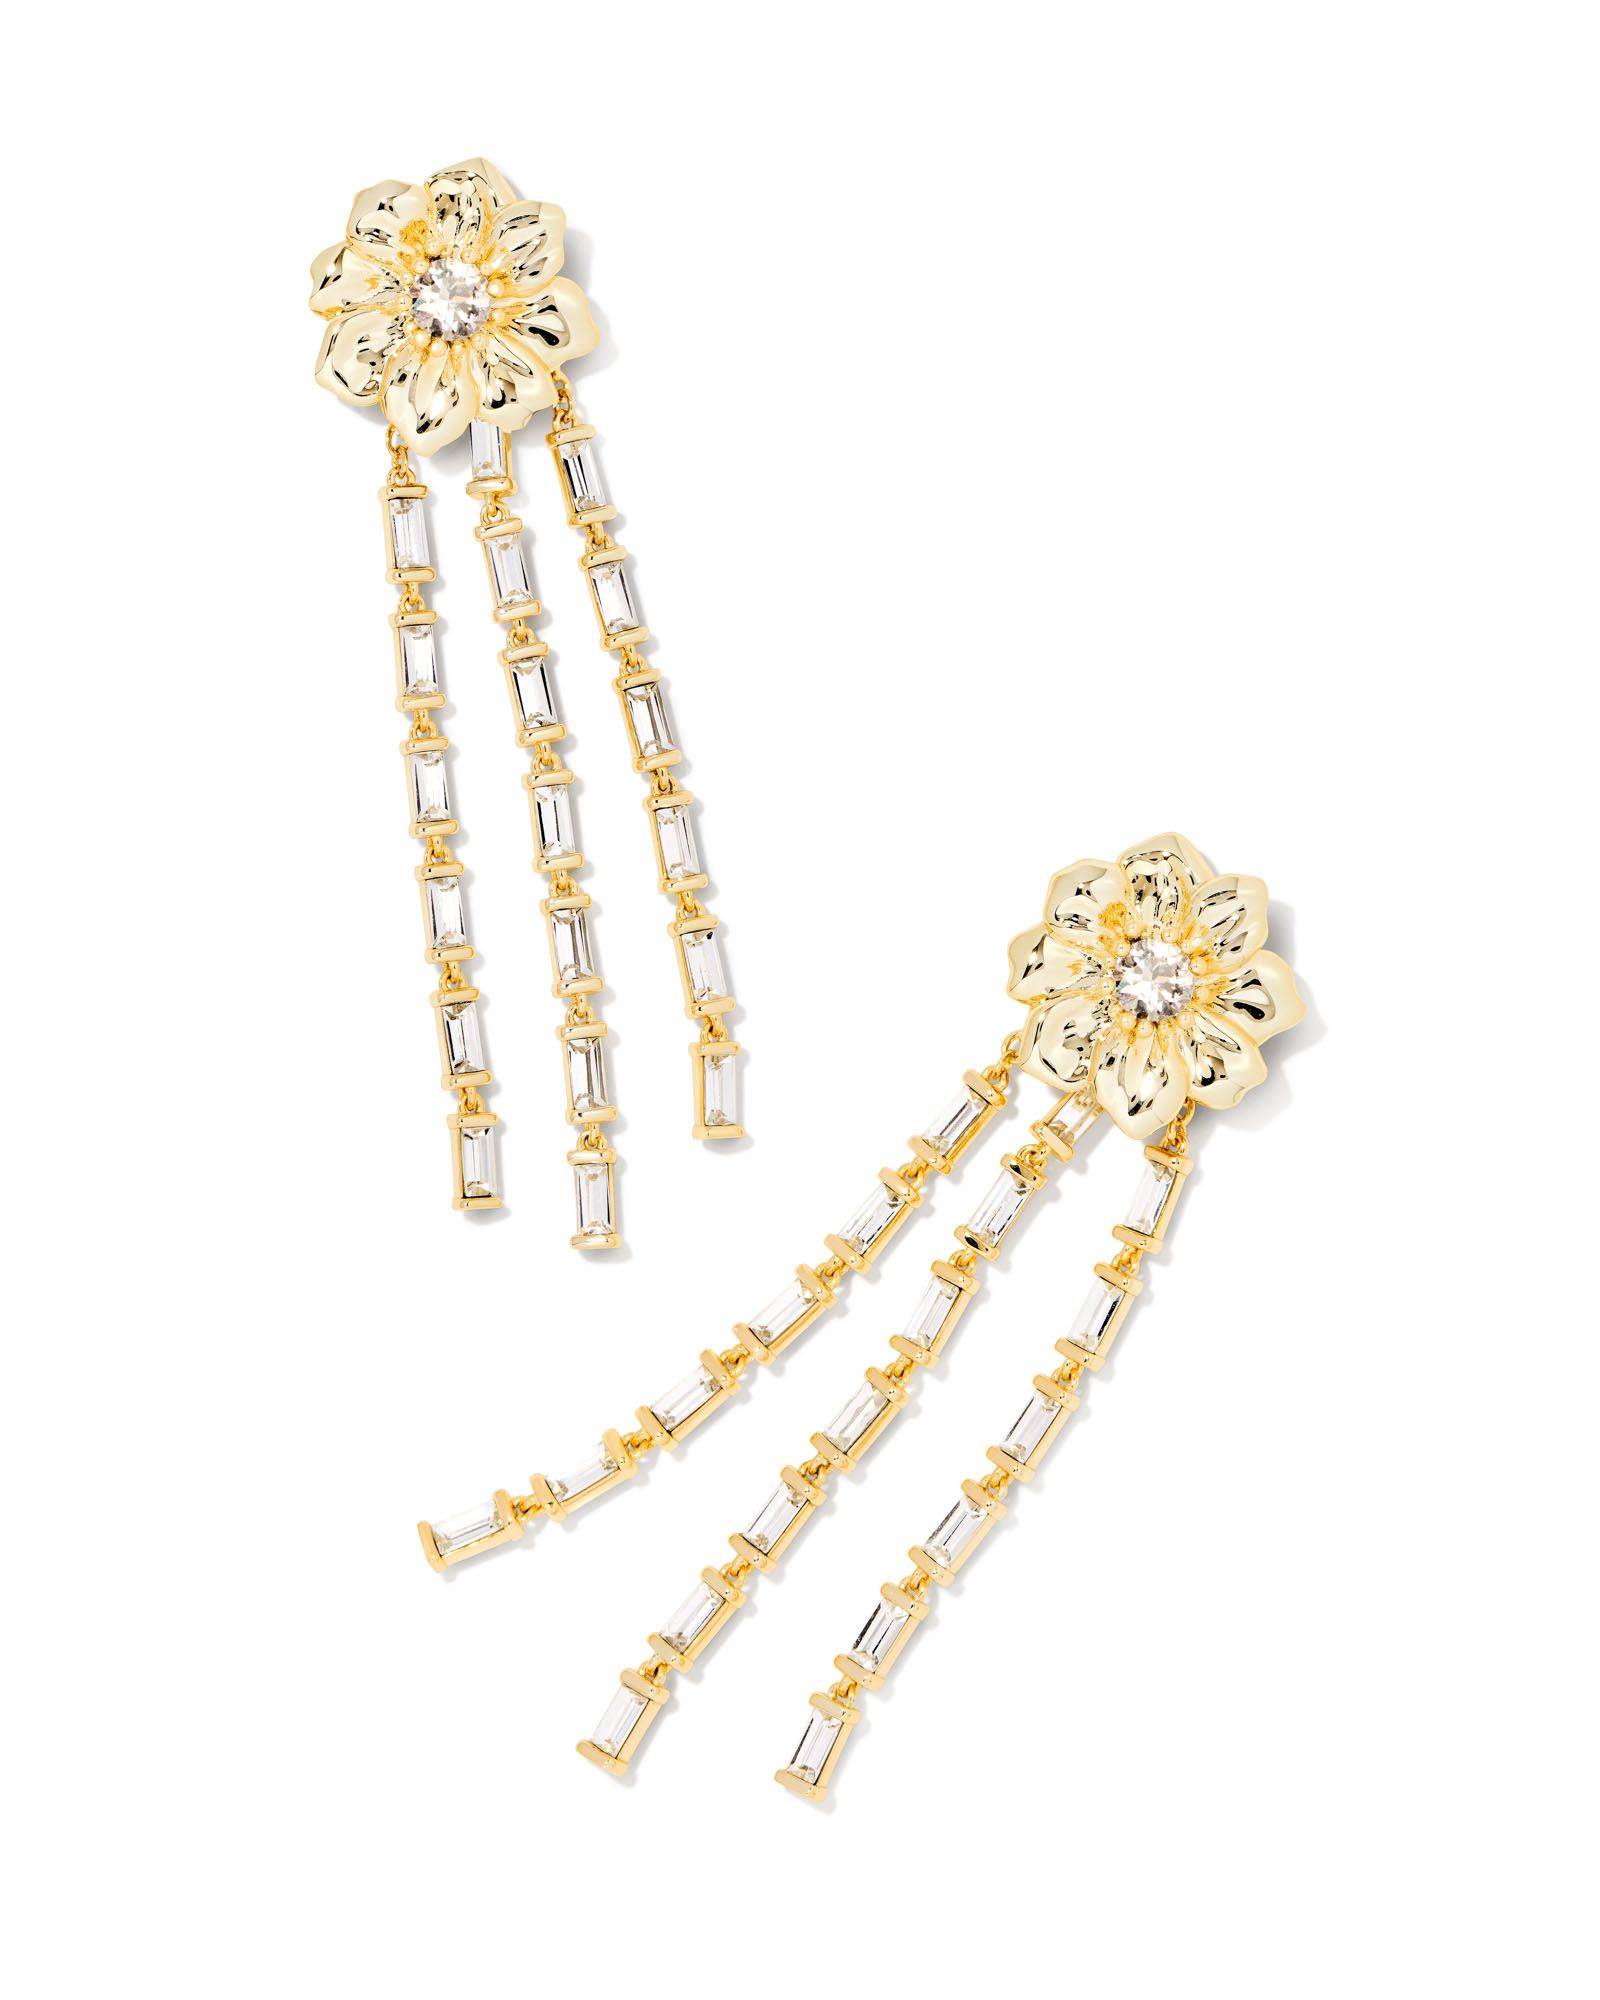 Cameron Silver Convertible Statement Earrings in White Crystal | Kendra Scott